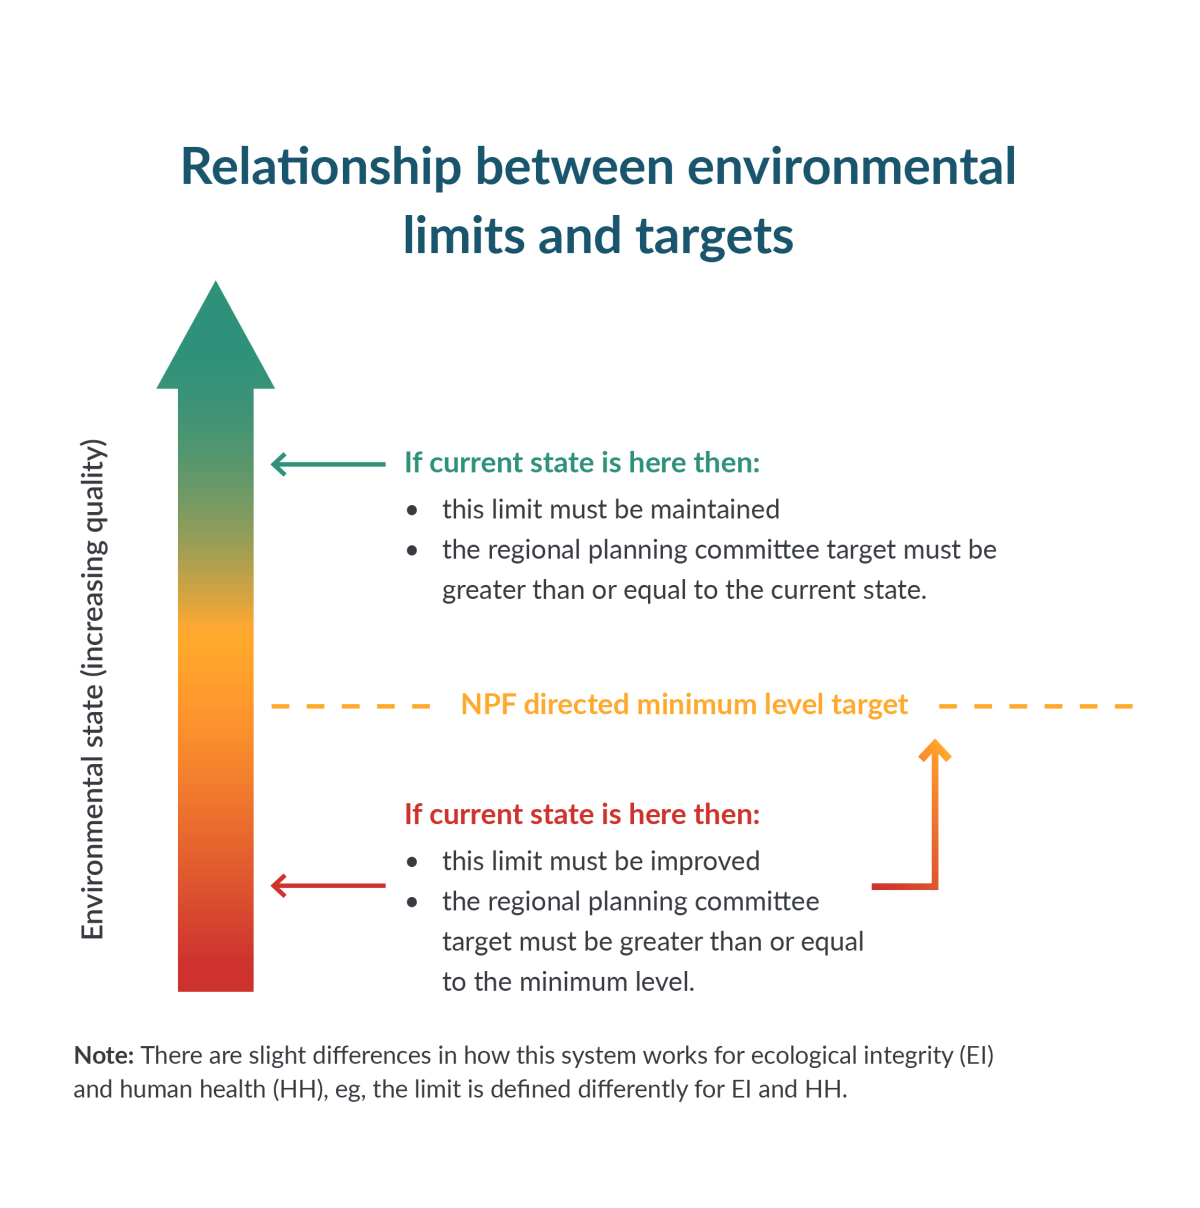 Relationship between limits and associated targets